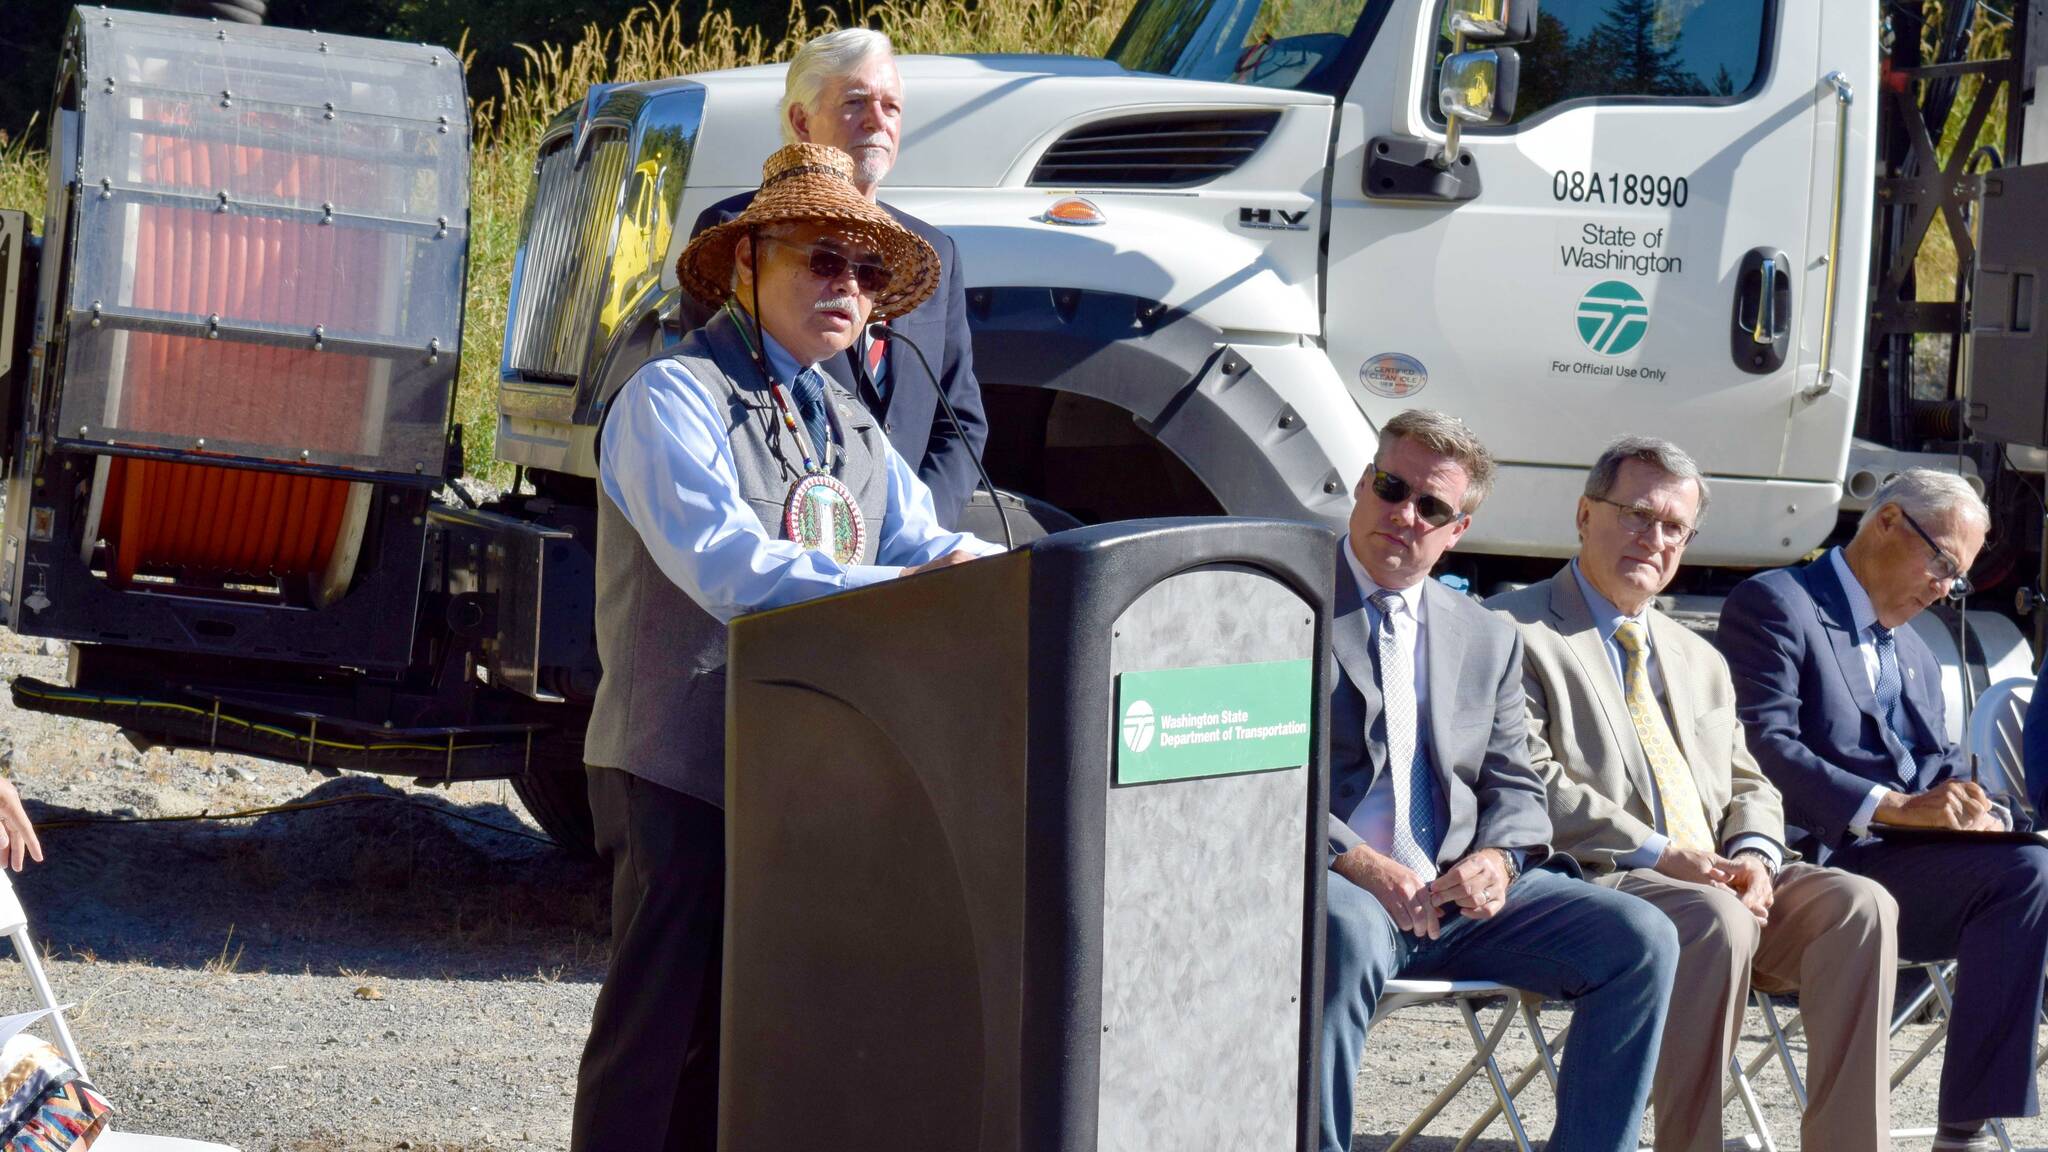 Snoqualmie Tribal Chairman Robert de los Angeles speaks at the I90/SR18 interchange ceremony. Photo by Conor Wilson/Valley Record.